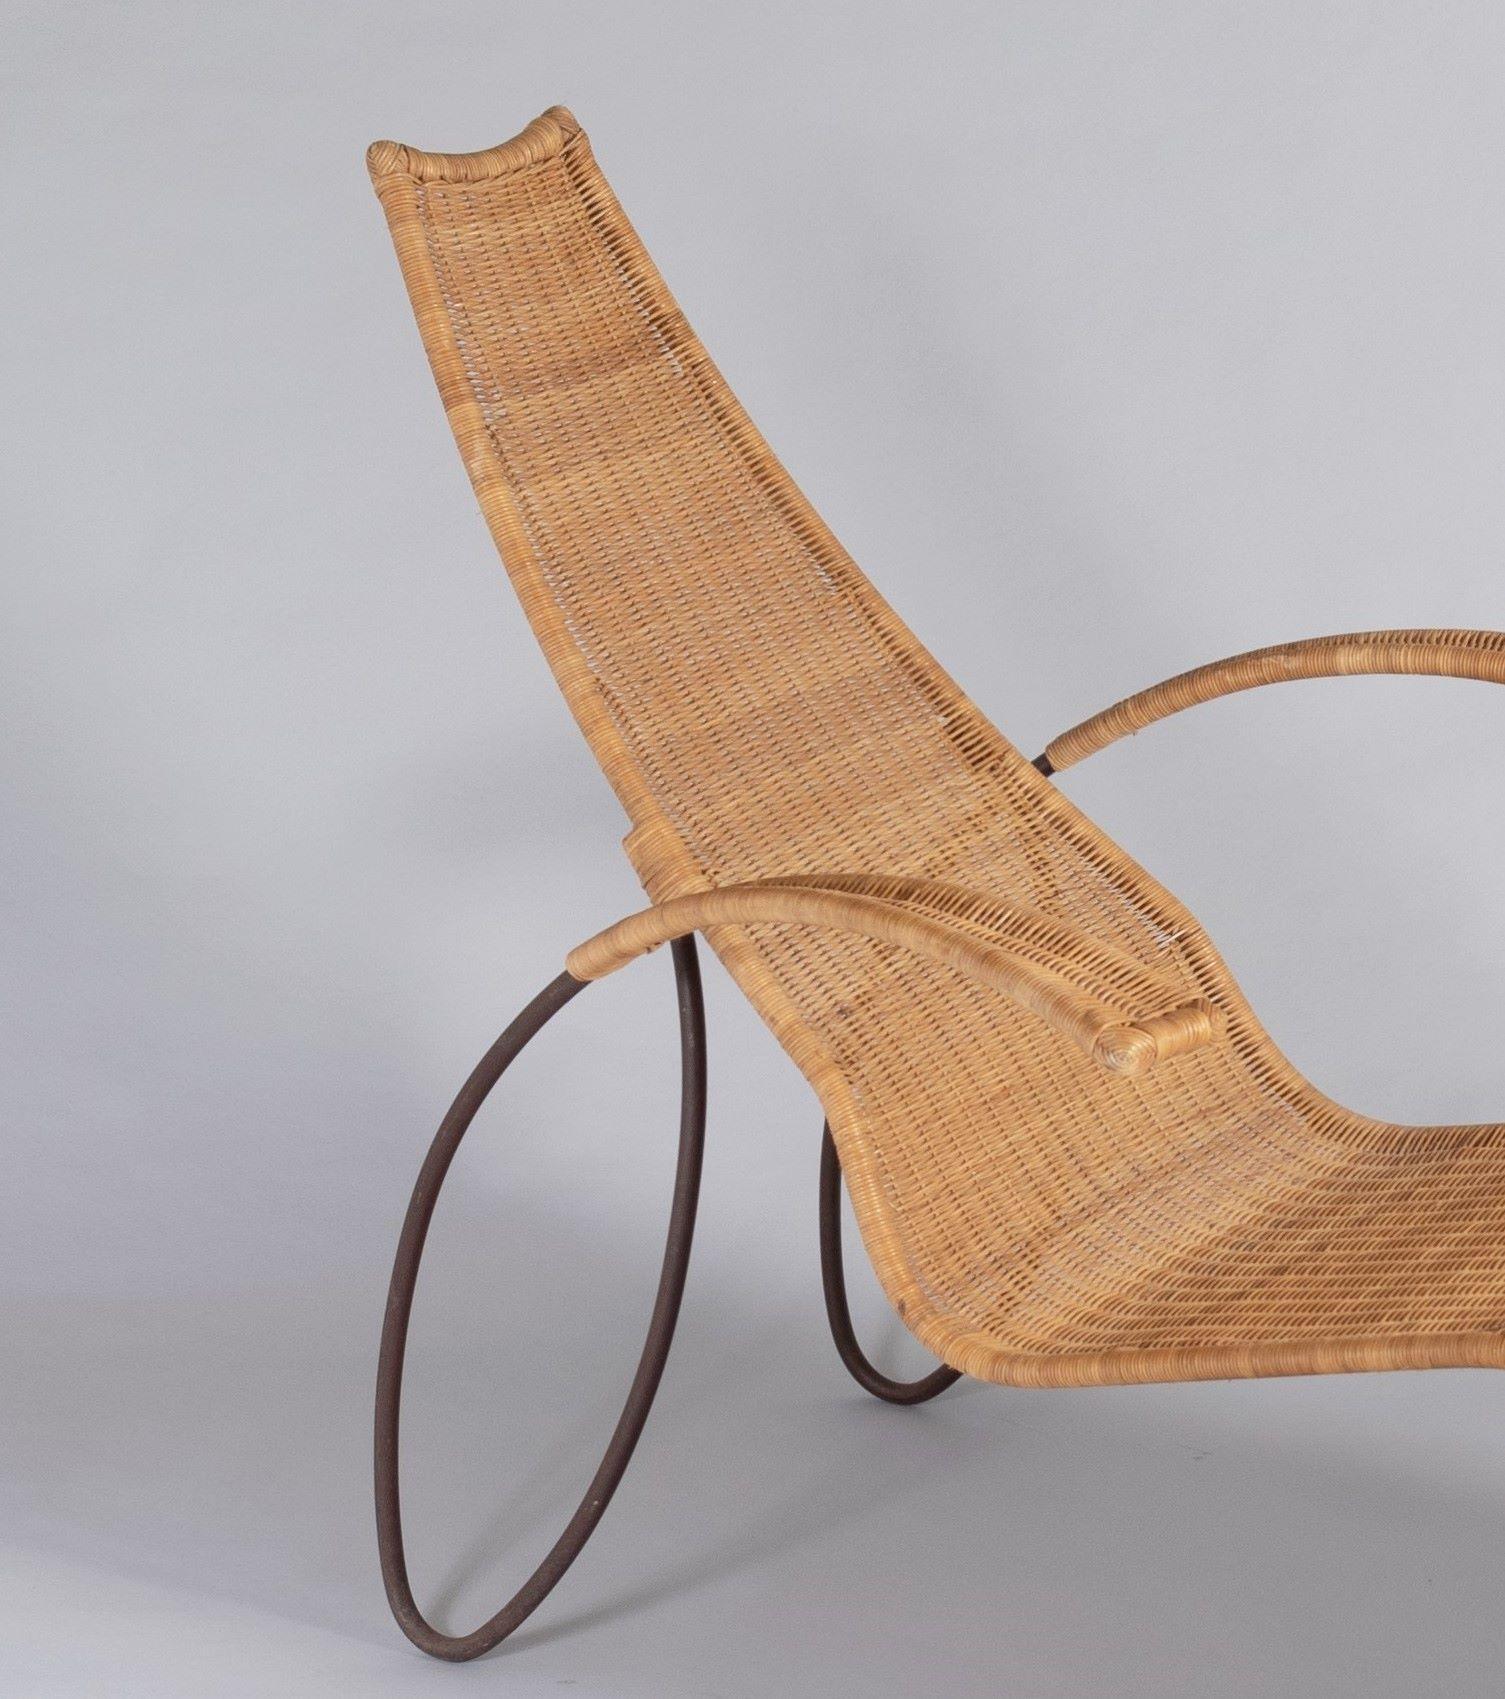 1930s Modernist Wrought Iron Frame Wicker Sun Longer Chaise with Arms + Footrest For Sale 4